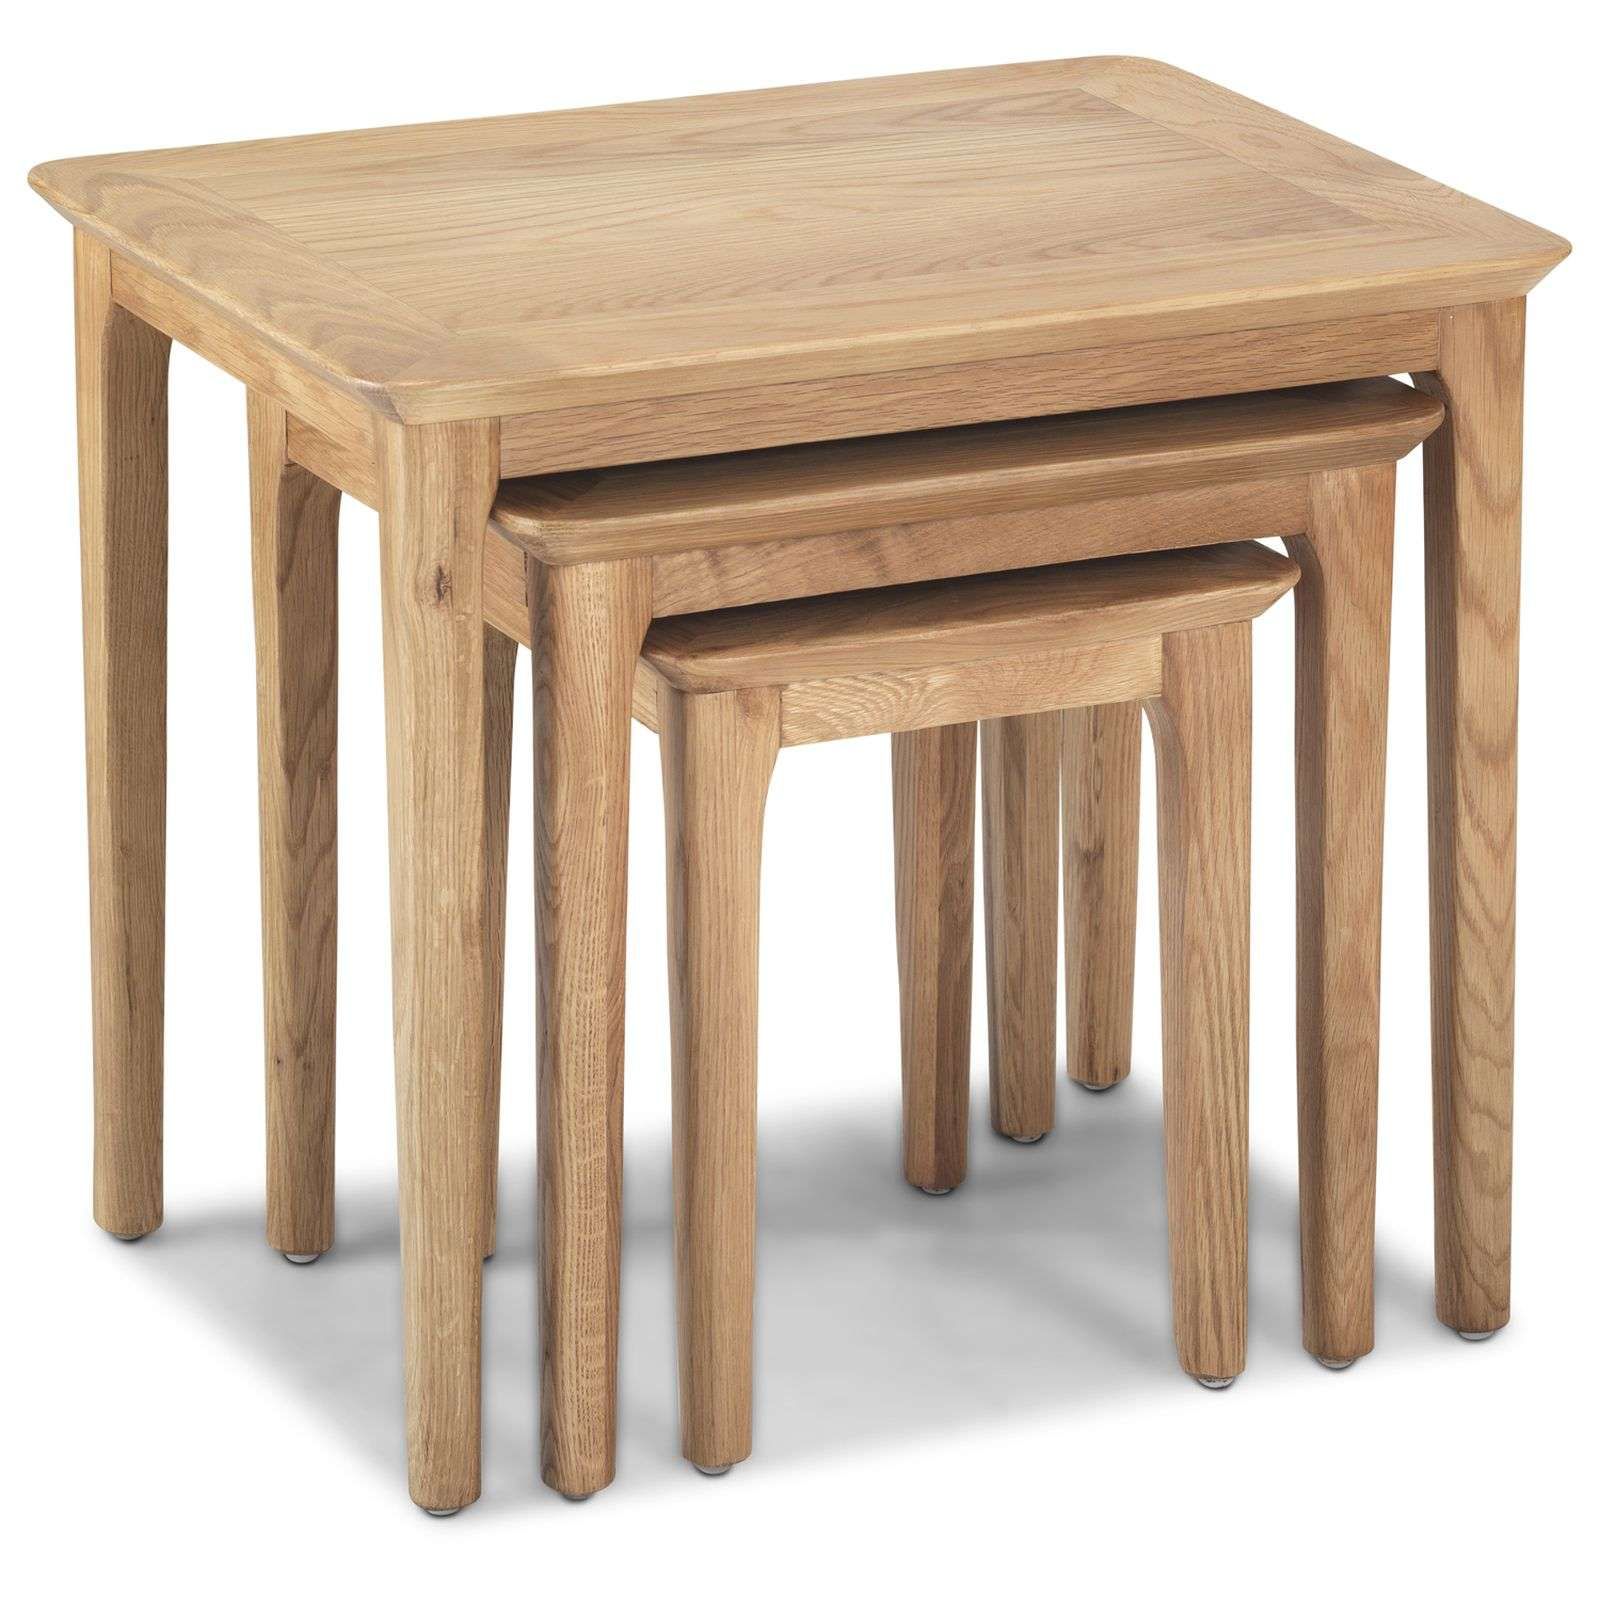 Telford Solid Oak Nest Of Three Coffee Tables – Discount Throughout Coffee Tables Of 3 Nesting Tables (Gallery 8 of 20)